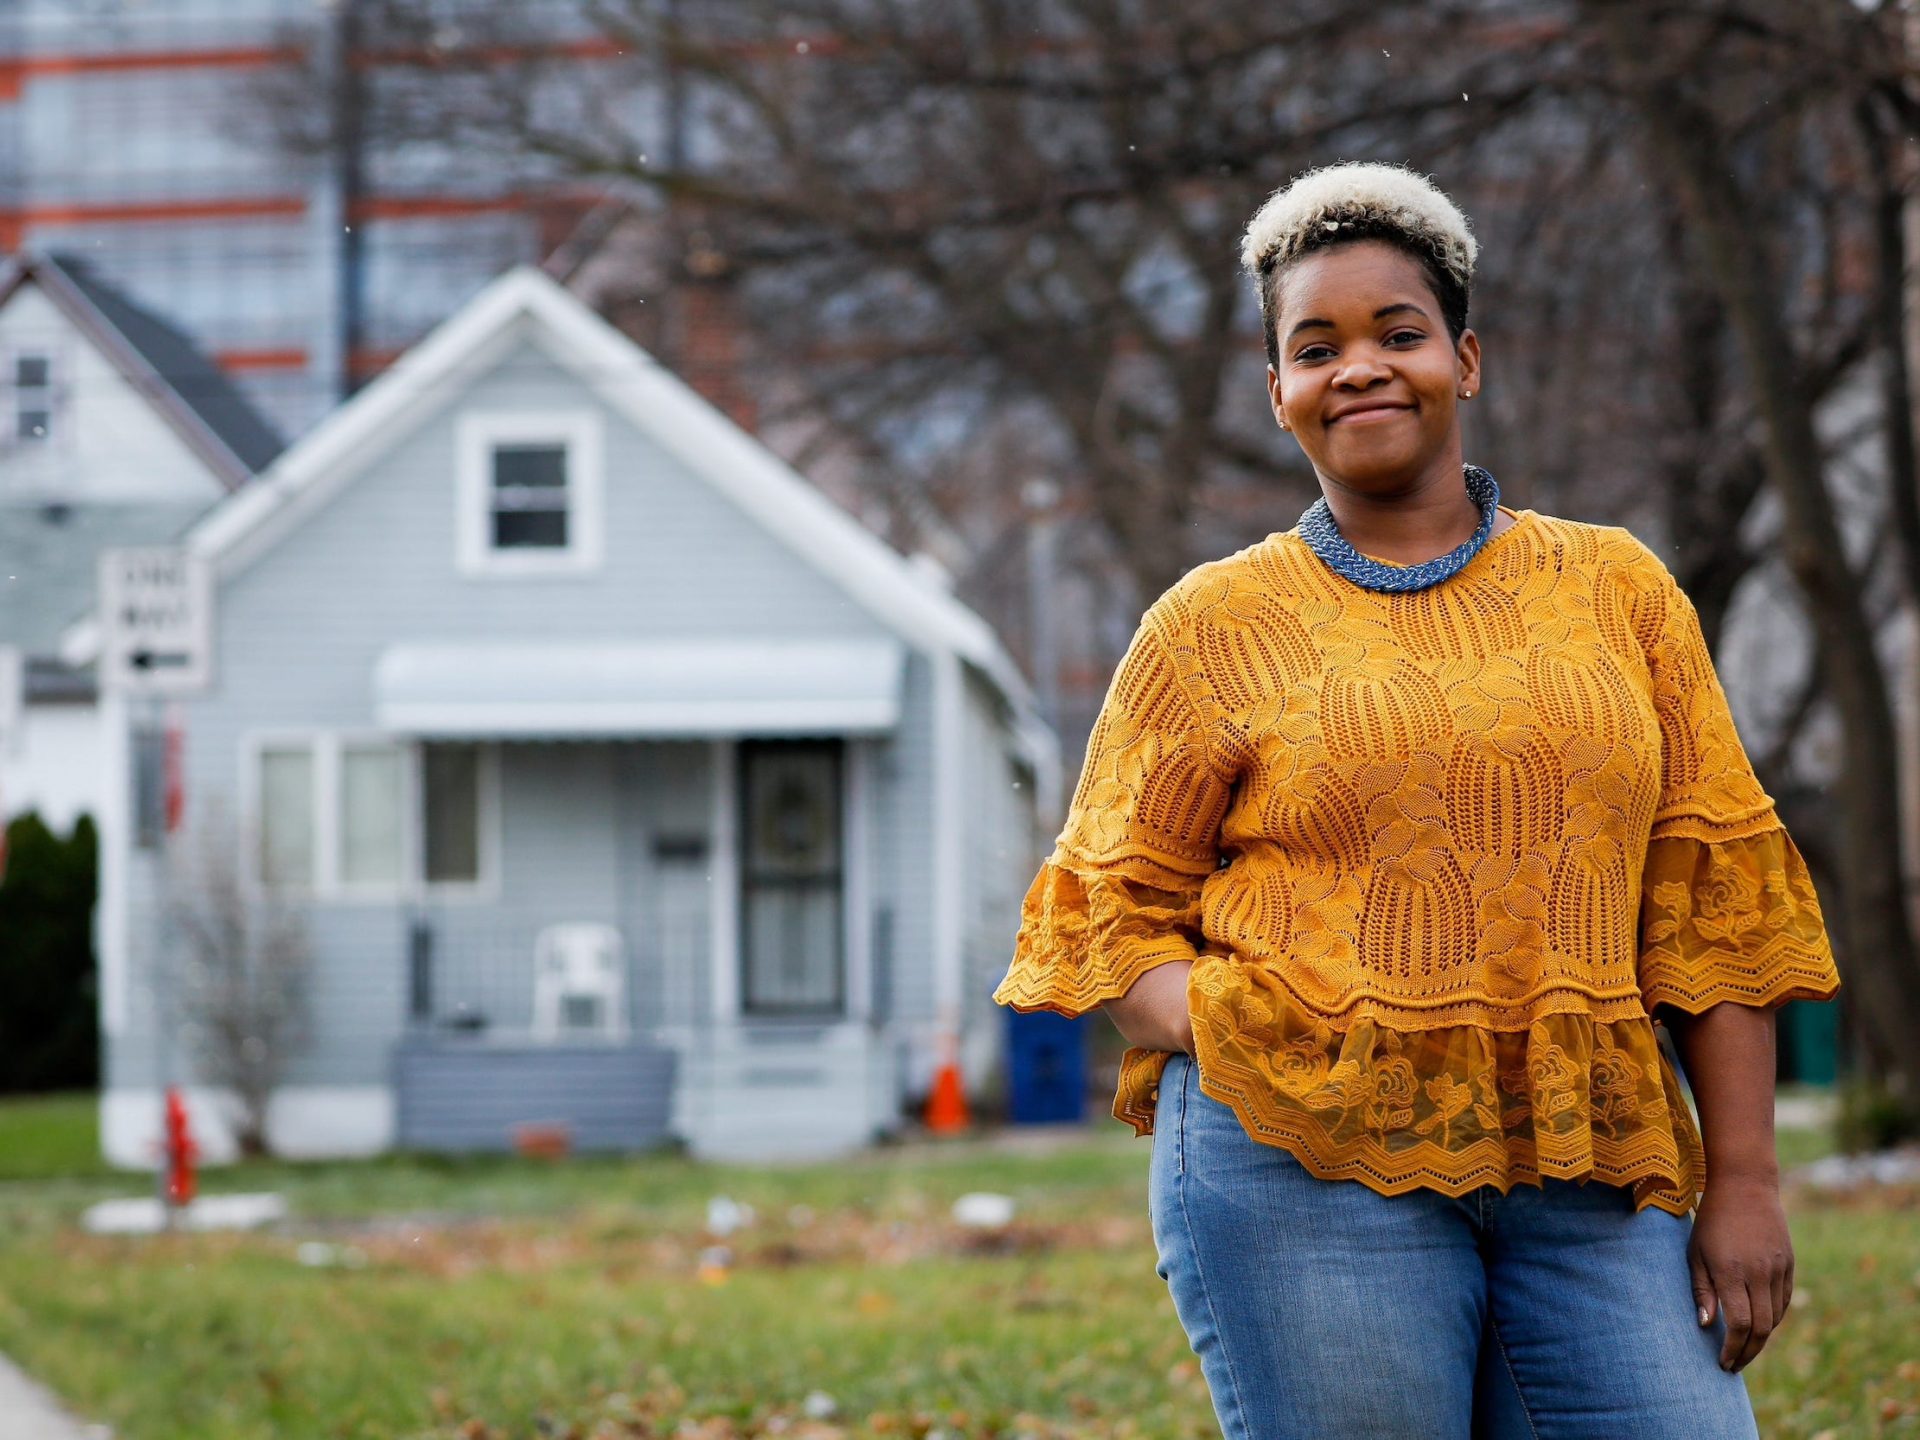 Democratic socialist India Walton, a surprise Democratic nominee for Buffalo mayor, hasn’t studied socialism since grade college, she tells us in the EIC interview